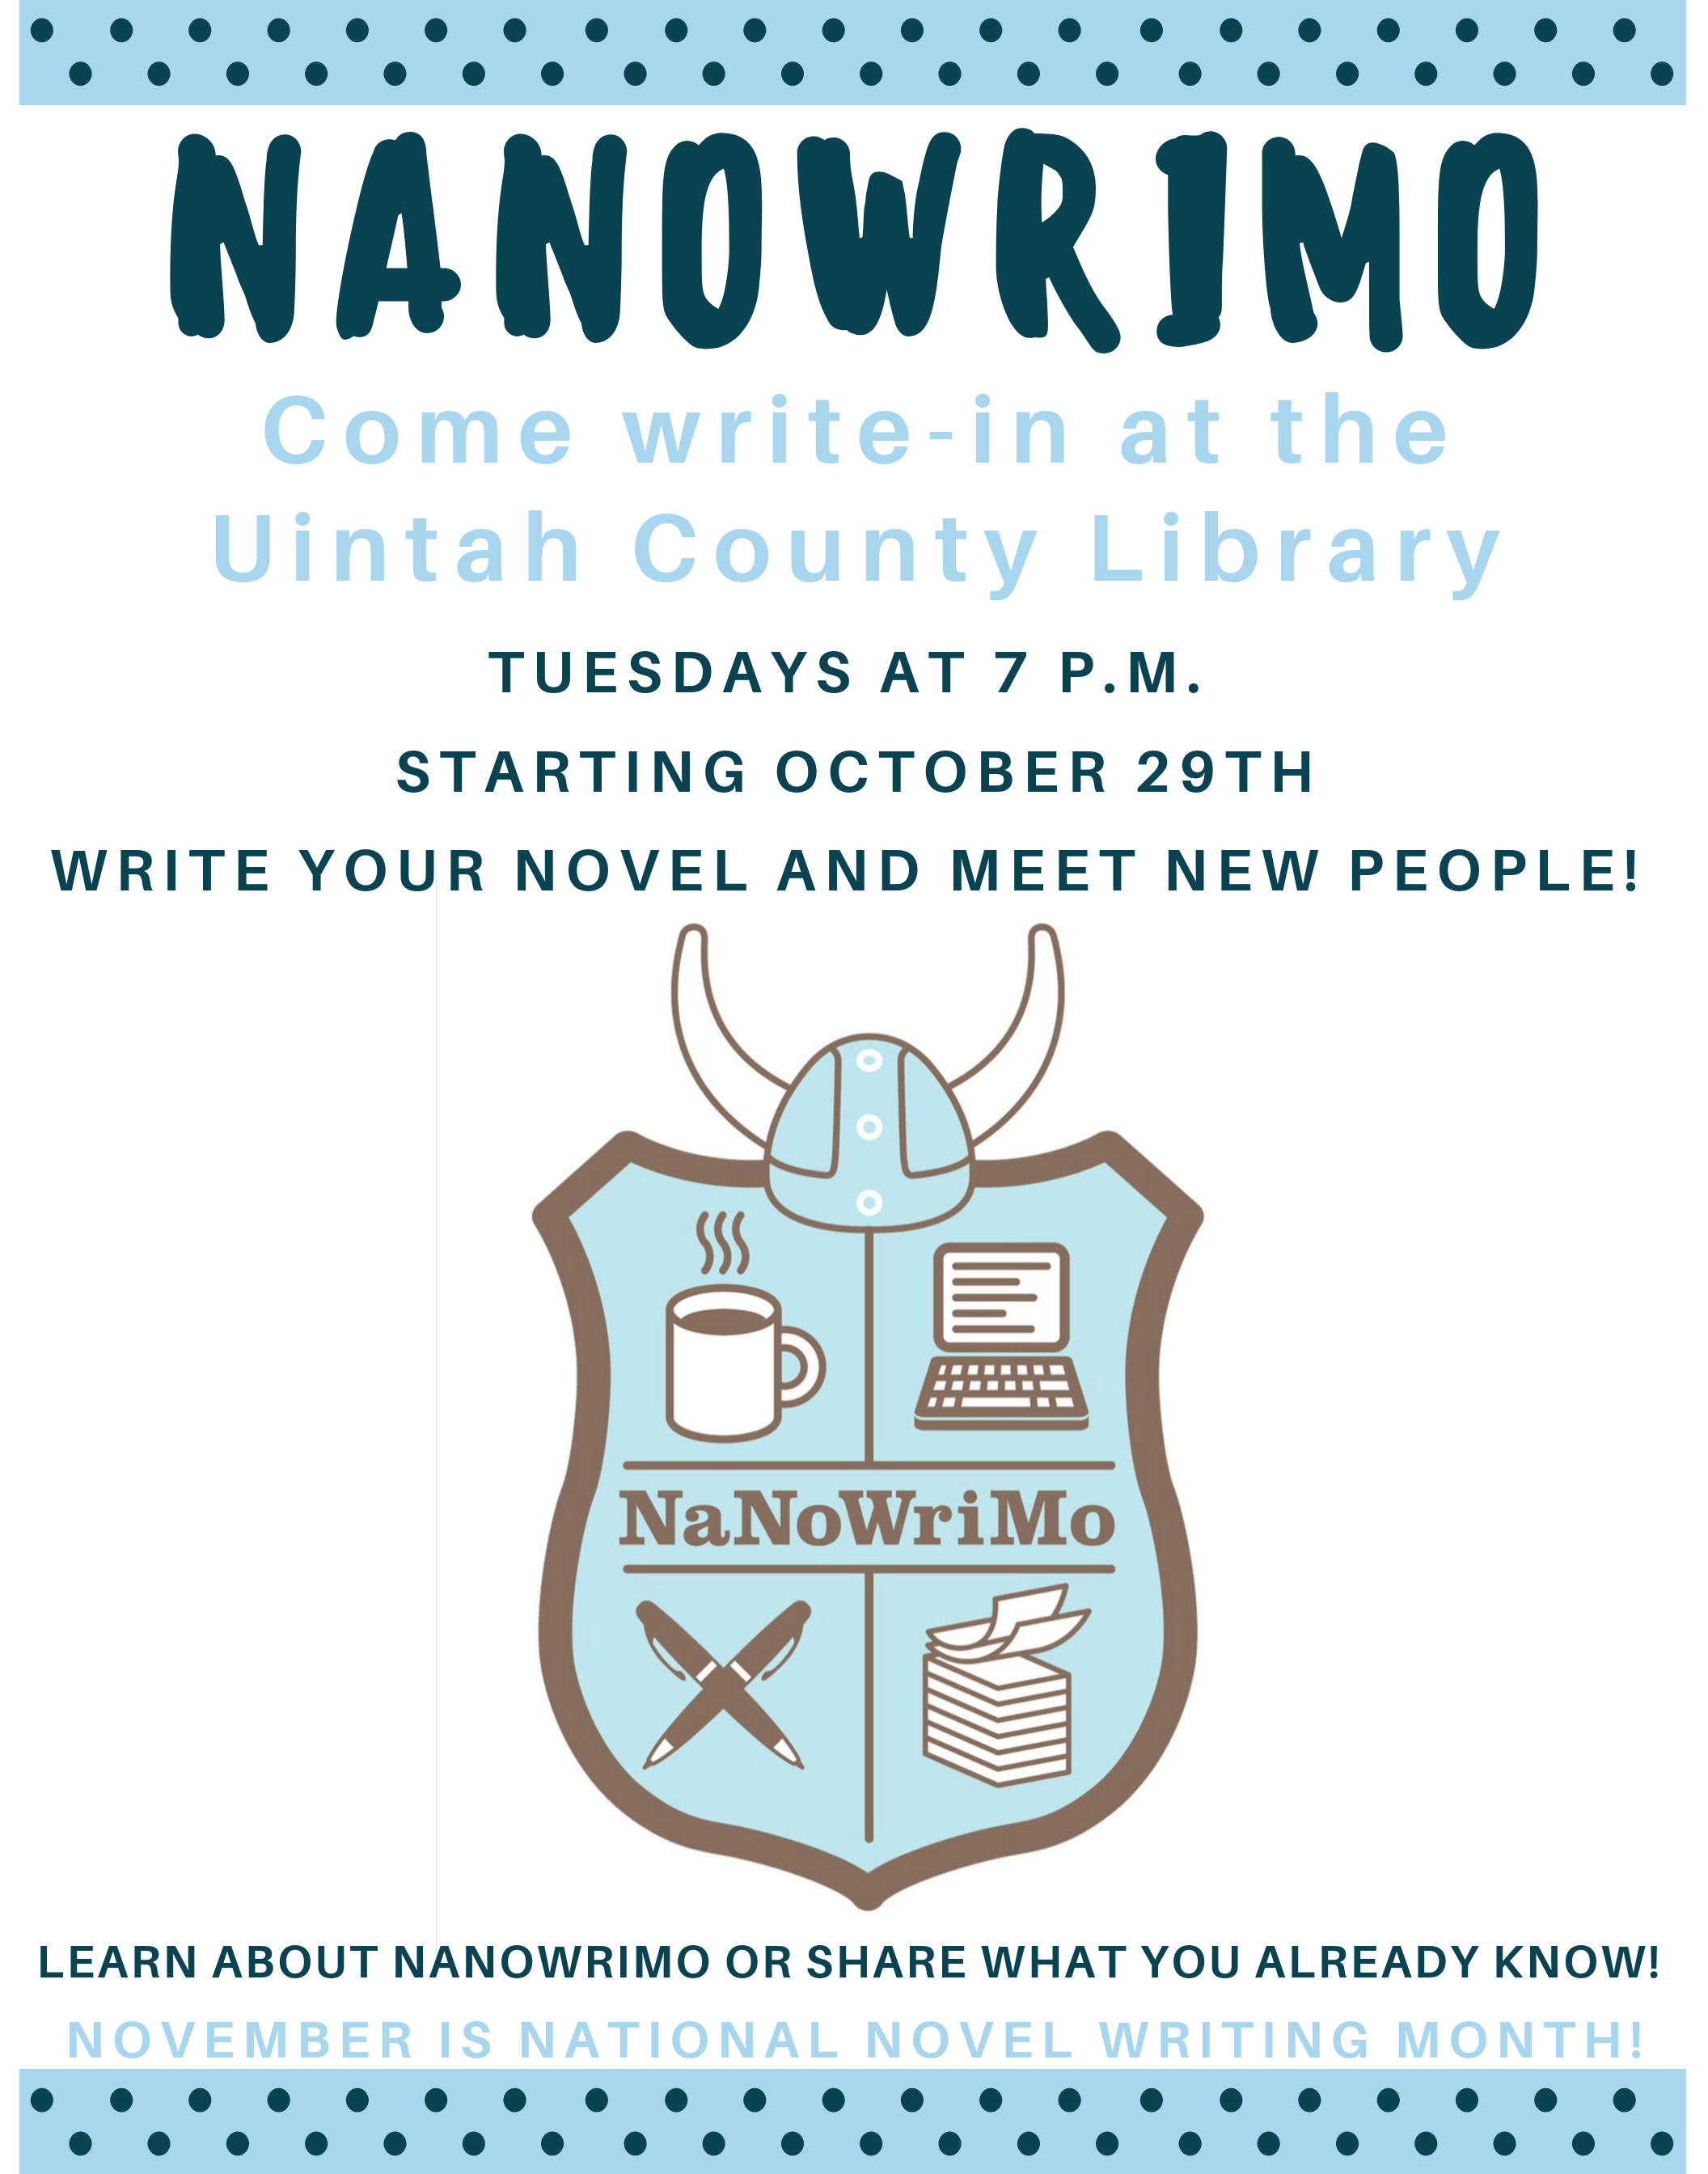 Image text: Nanowrimo come write-in at the Uintah County Library Tuesdays at 7 p.m. starting October 29th. Write your novel and meet new people! Learn about nanowrimo or share what you already know! november is national novel writing month! 